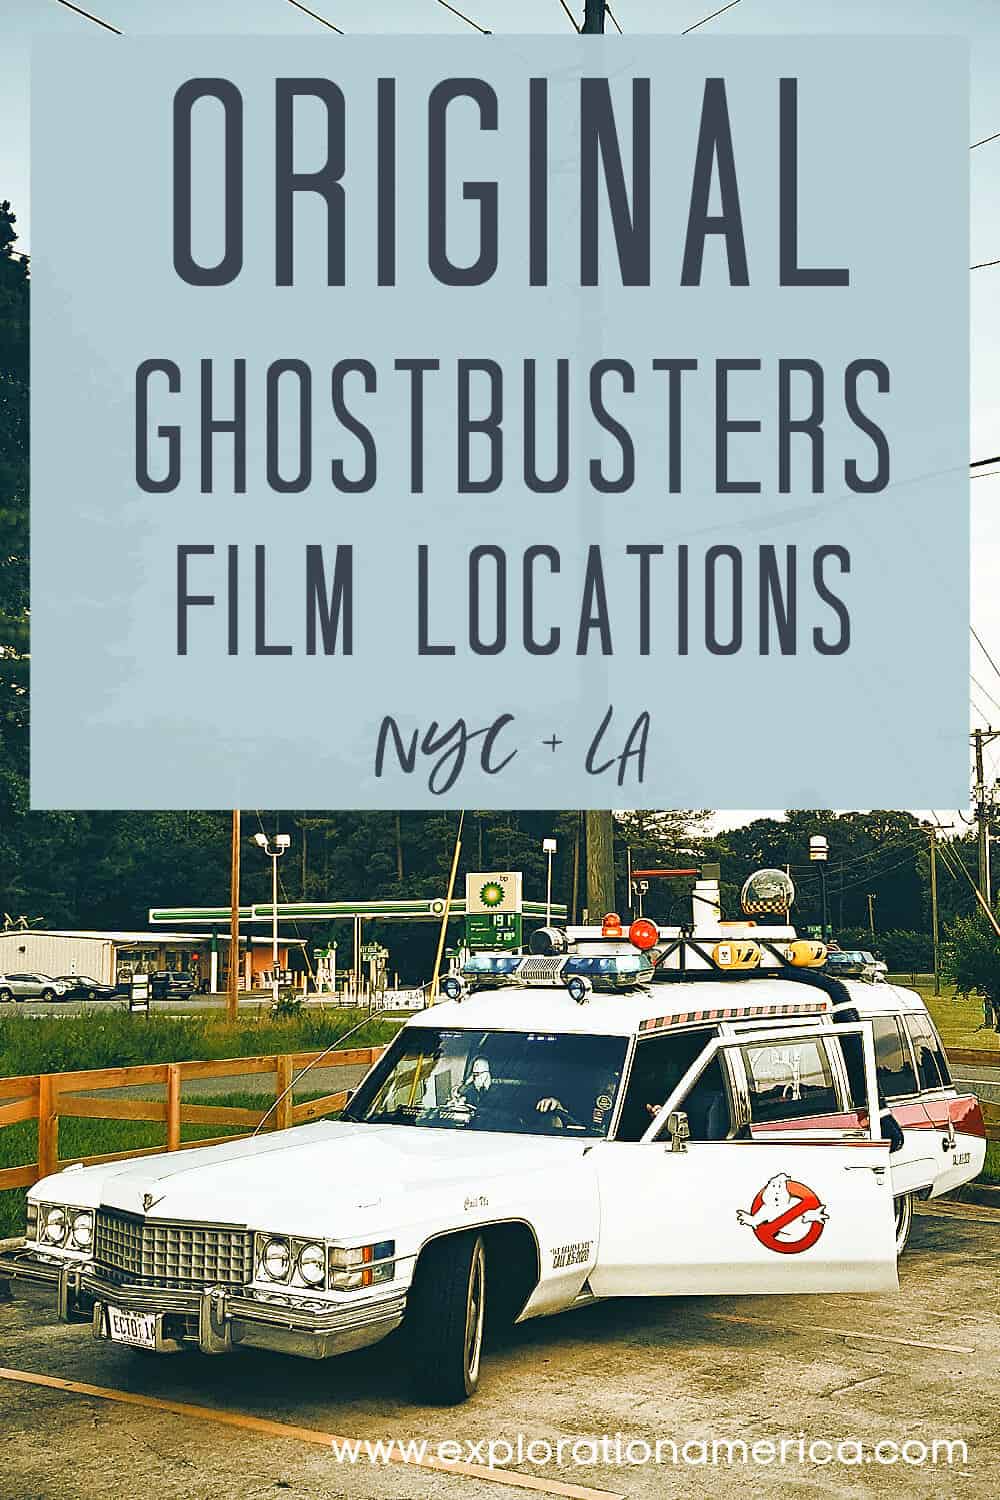 Original Ghostbusters Filming Locations in New York and Los Angeles